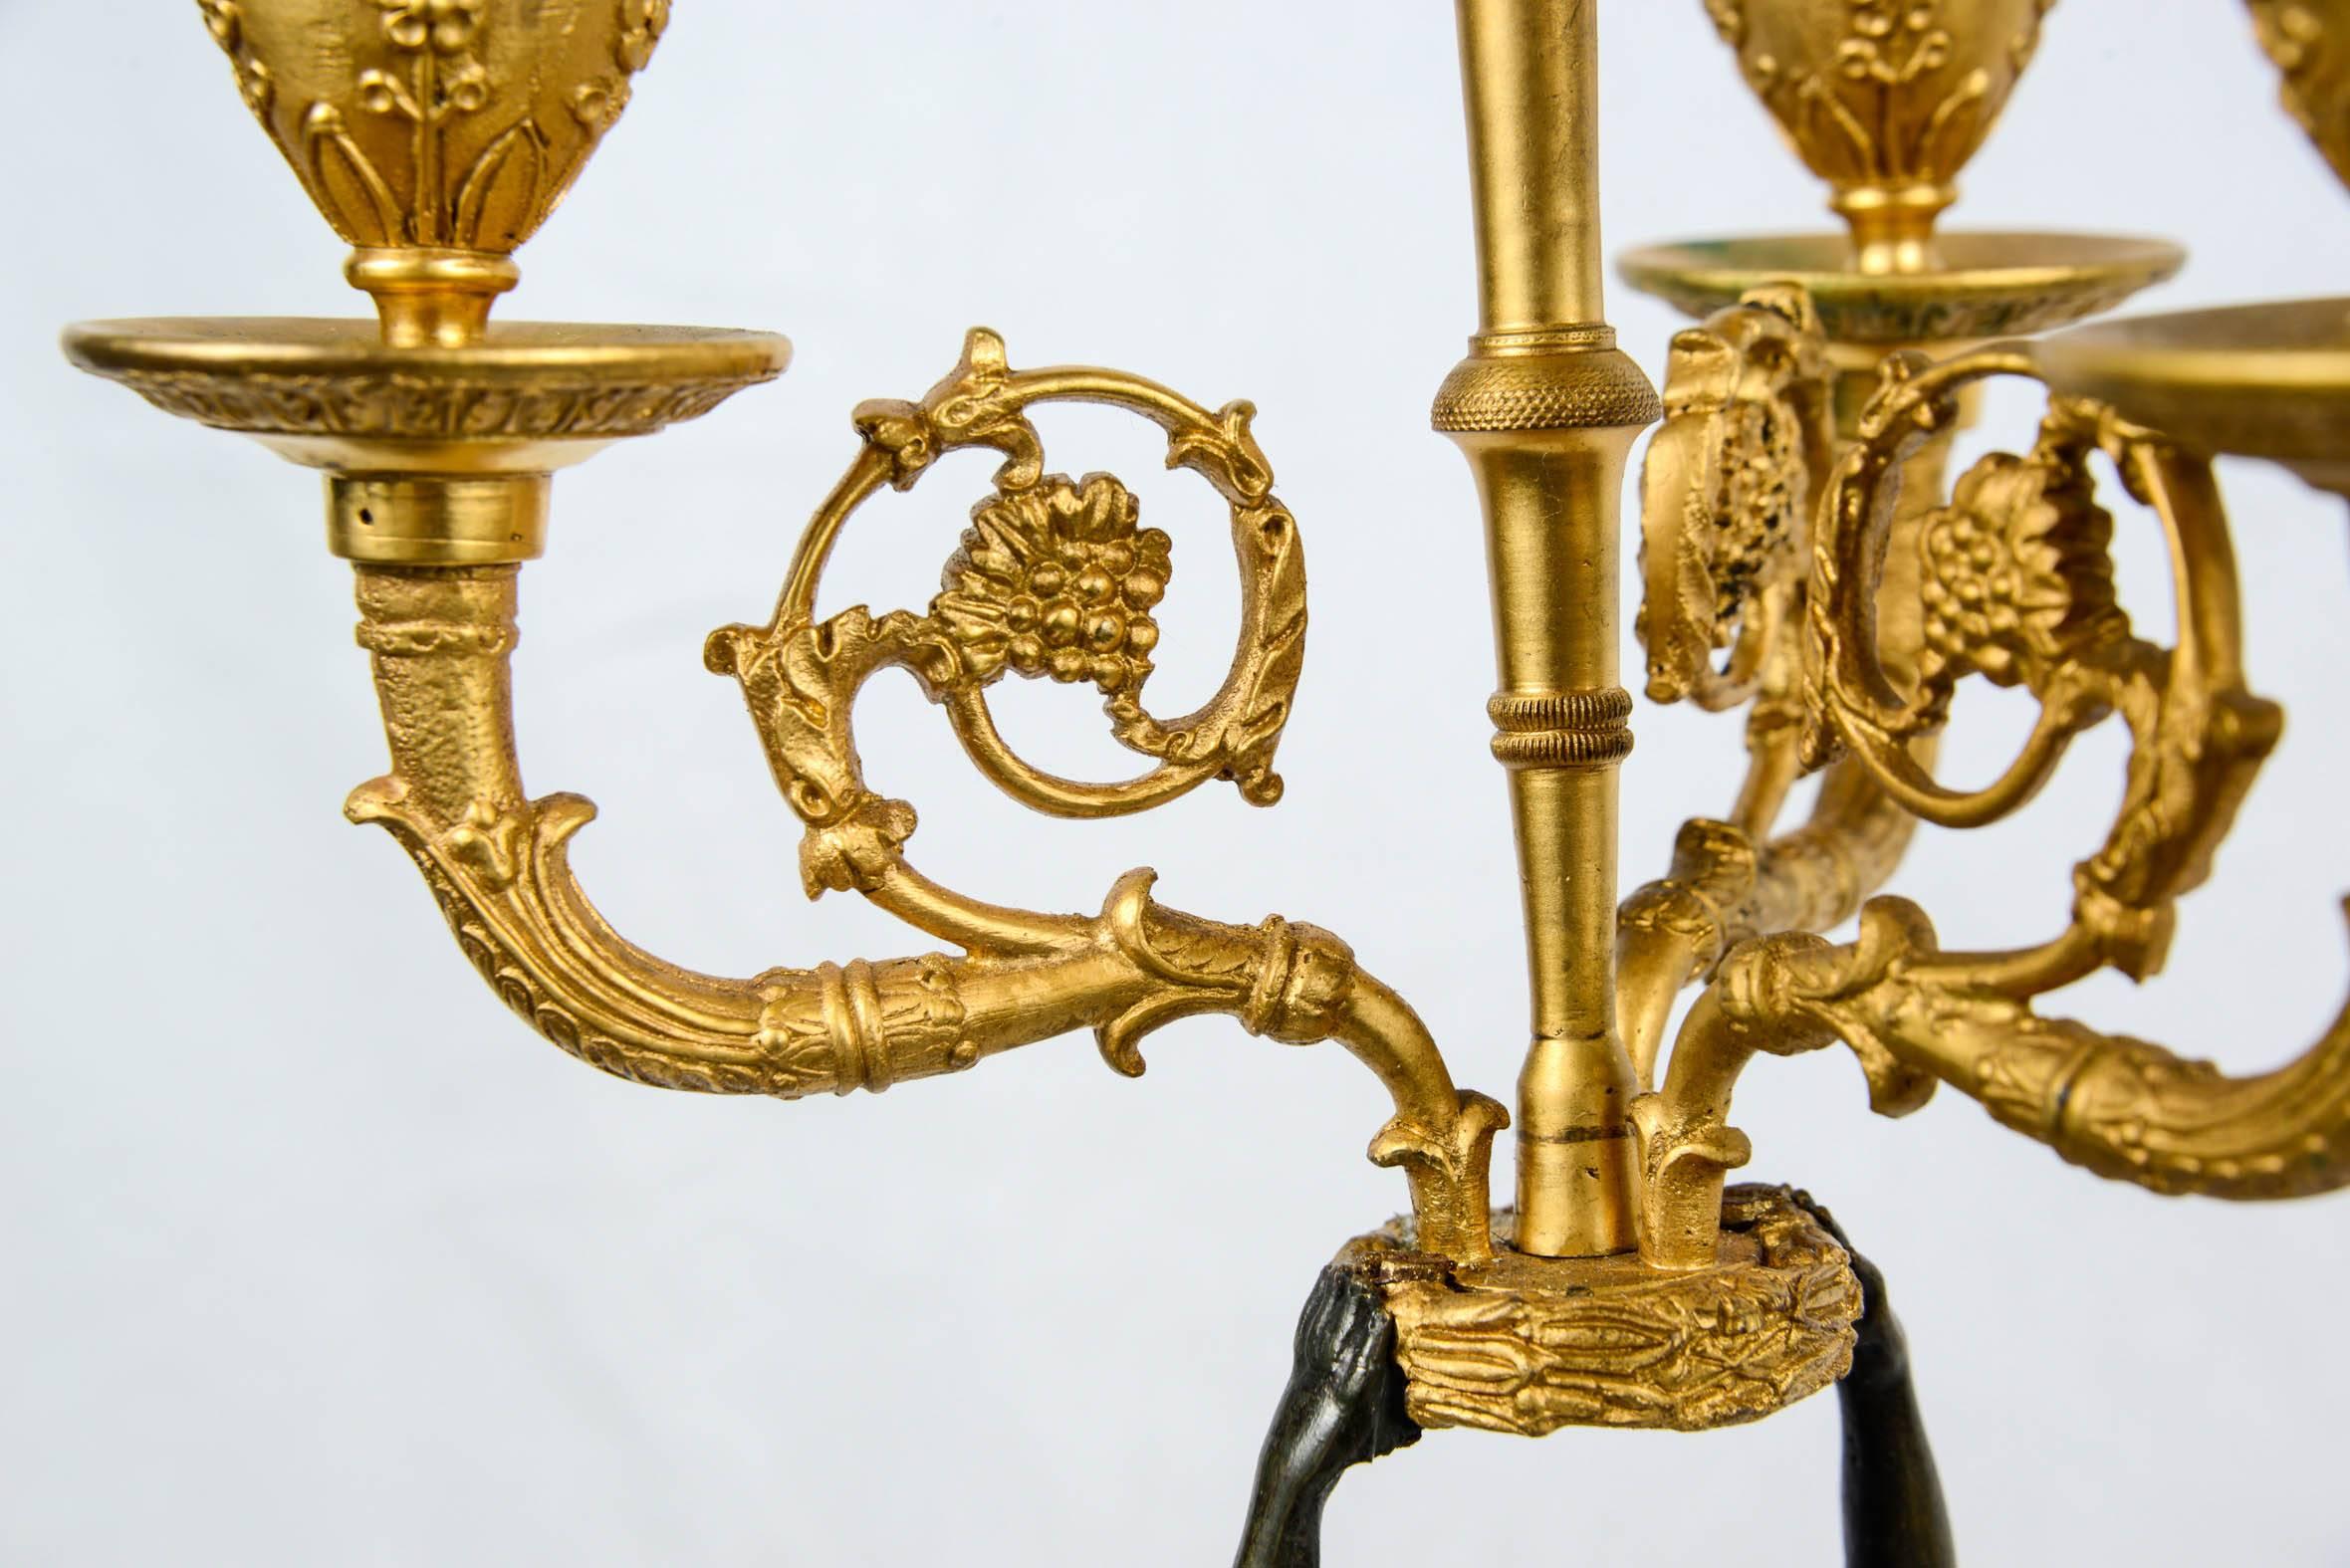 Pair of Gilded and Patined Candelabras in Bronze, France, 1870 For Sale 3